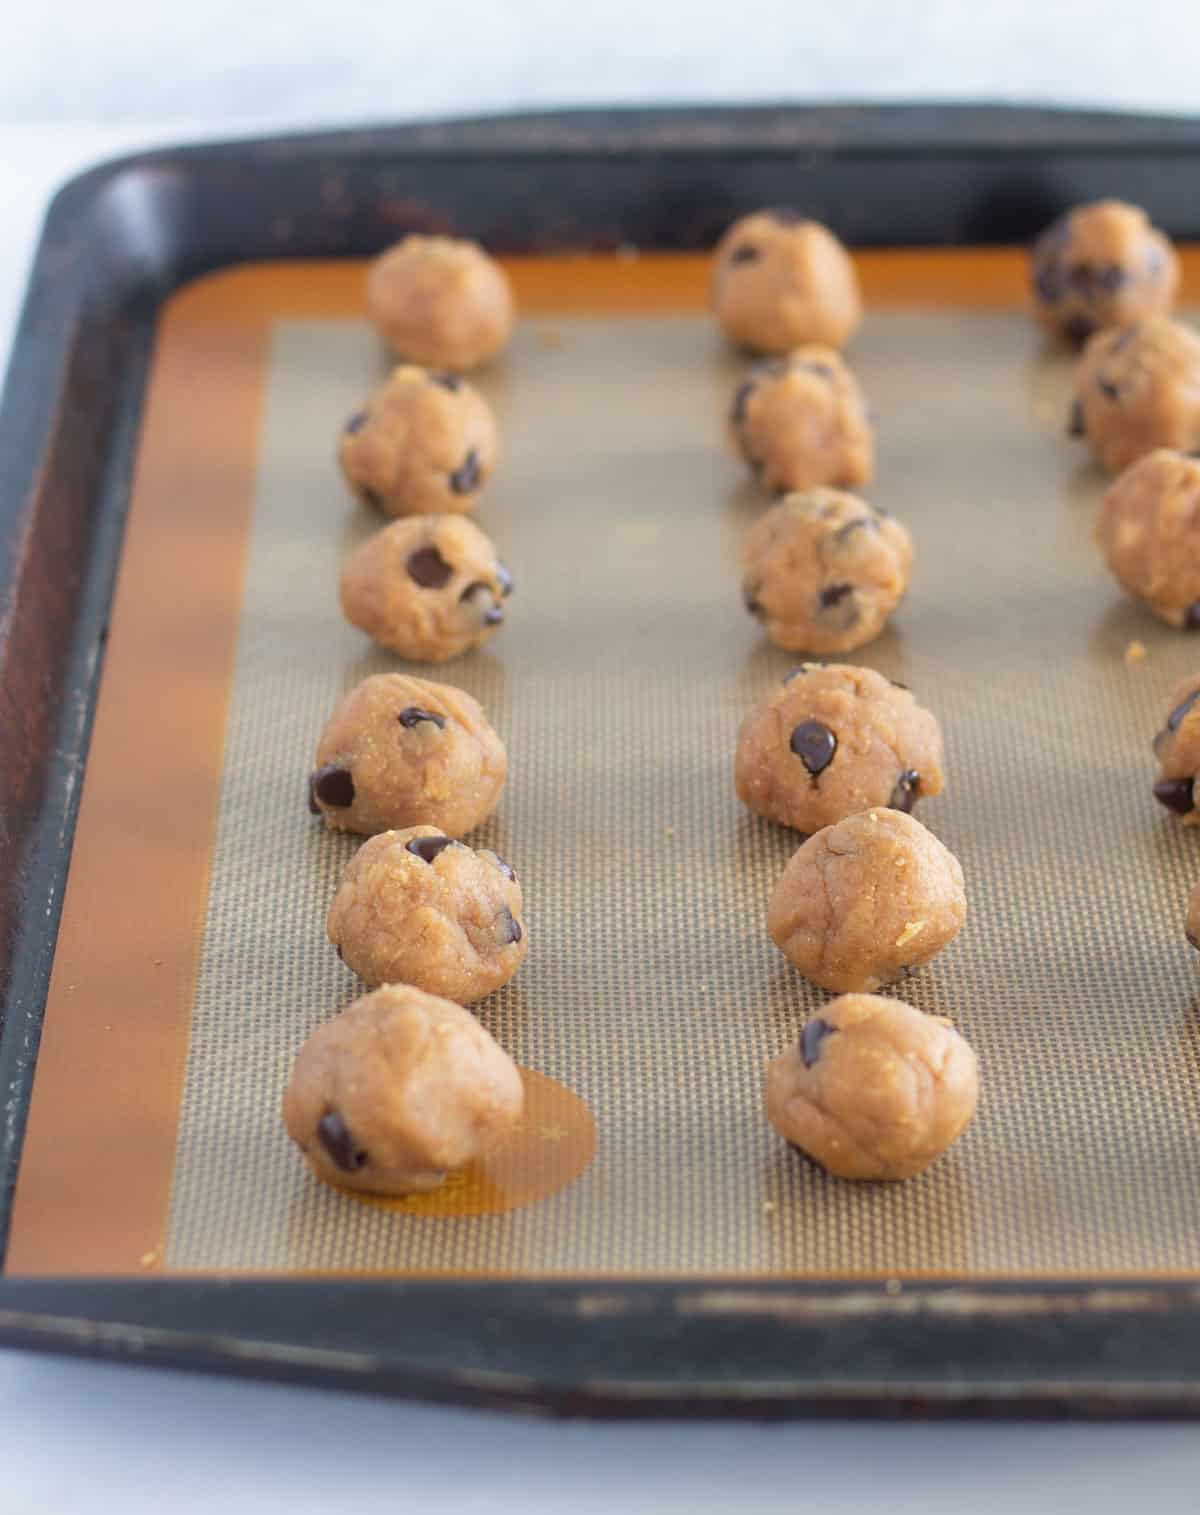 Dough rolled into balls on lined baking sheet.